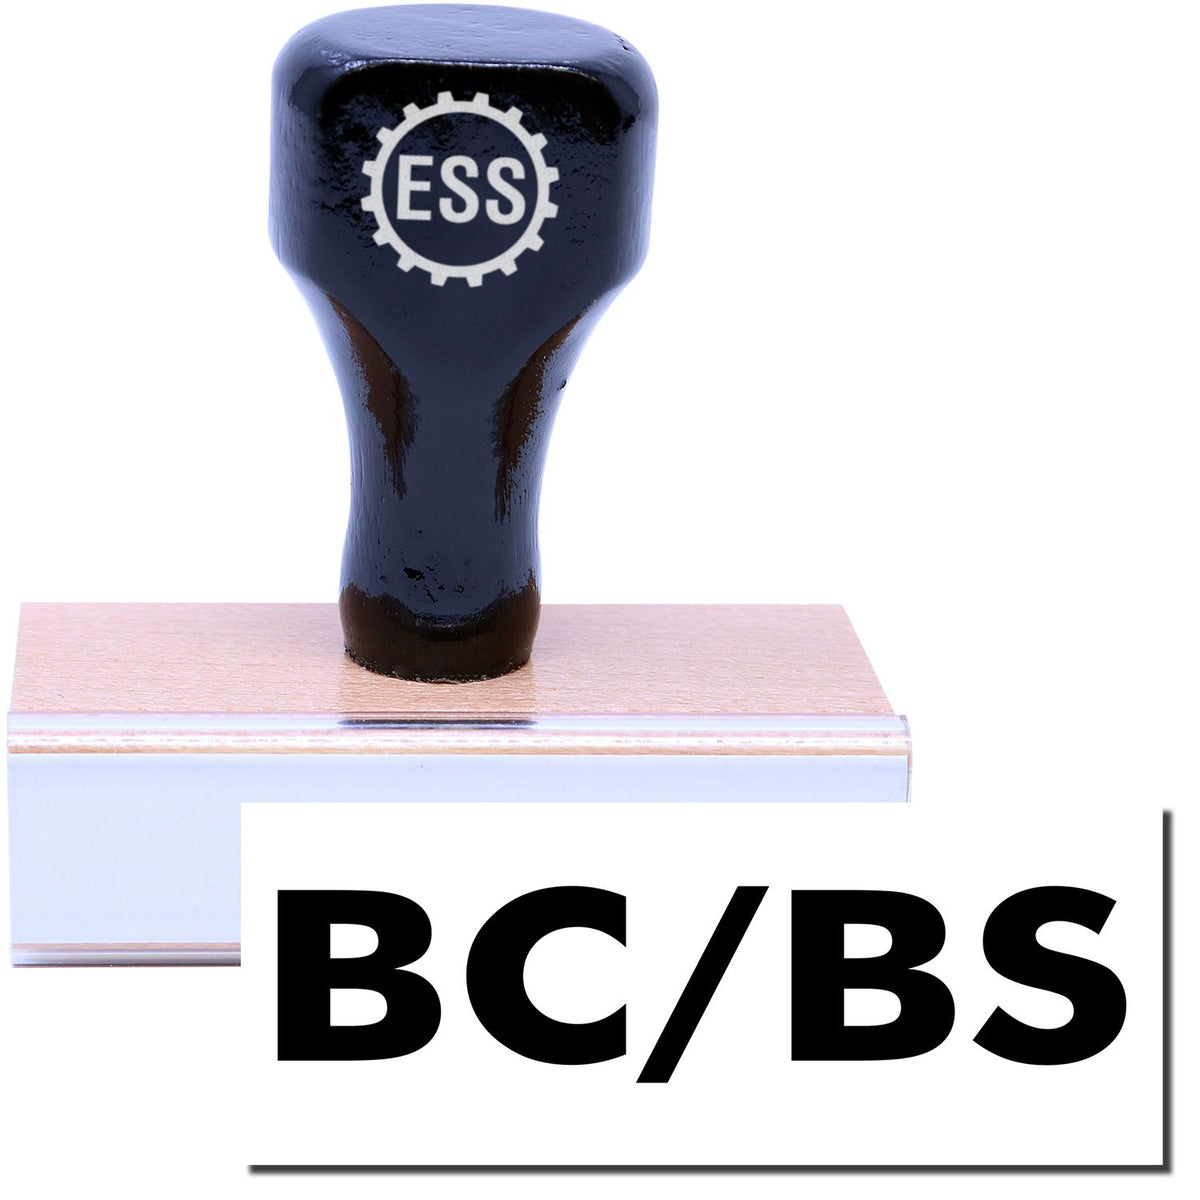 A stock office medical rubber stamp with a stamped image showing how the text &quot;BC/BS&quot; is displayed after stamping.